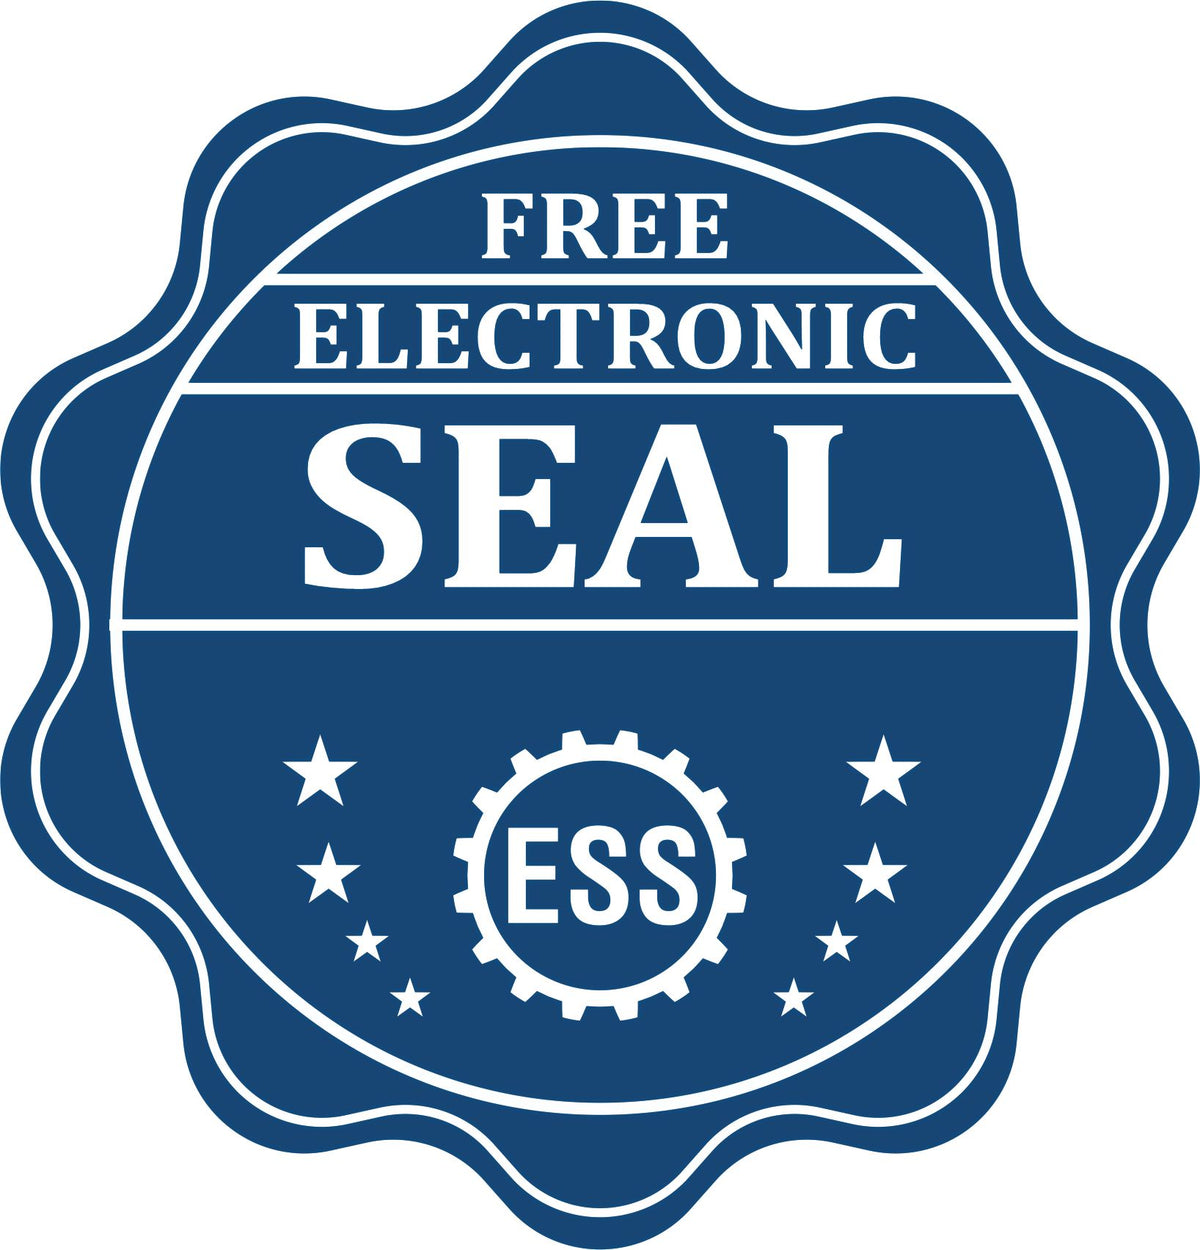 A badge showing a free electronic seal for the Gift Virginia Engineer Seal with stars and the ESS gear on the emblem.